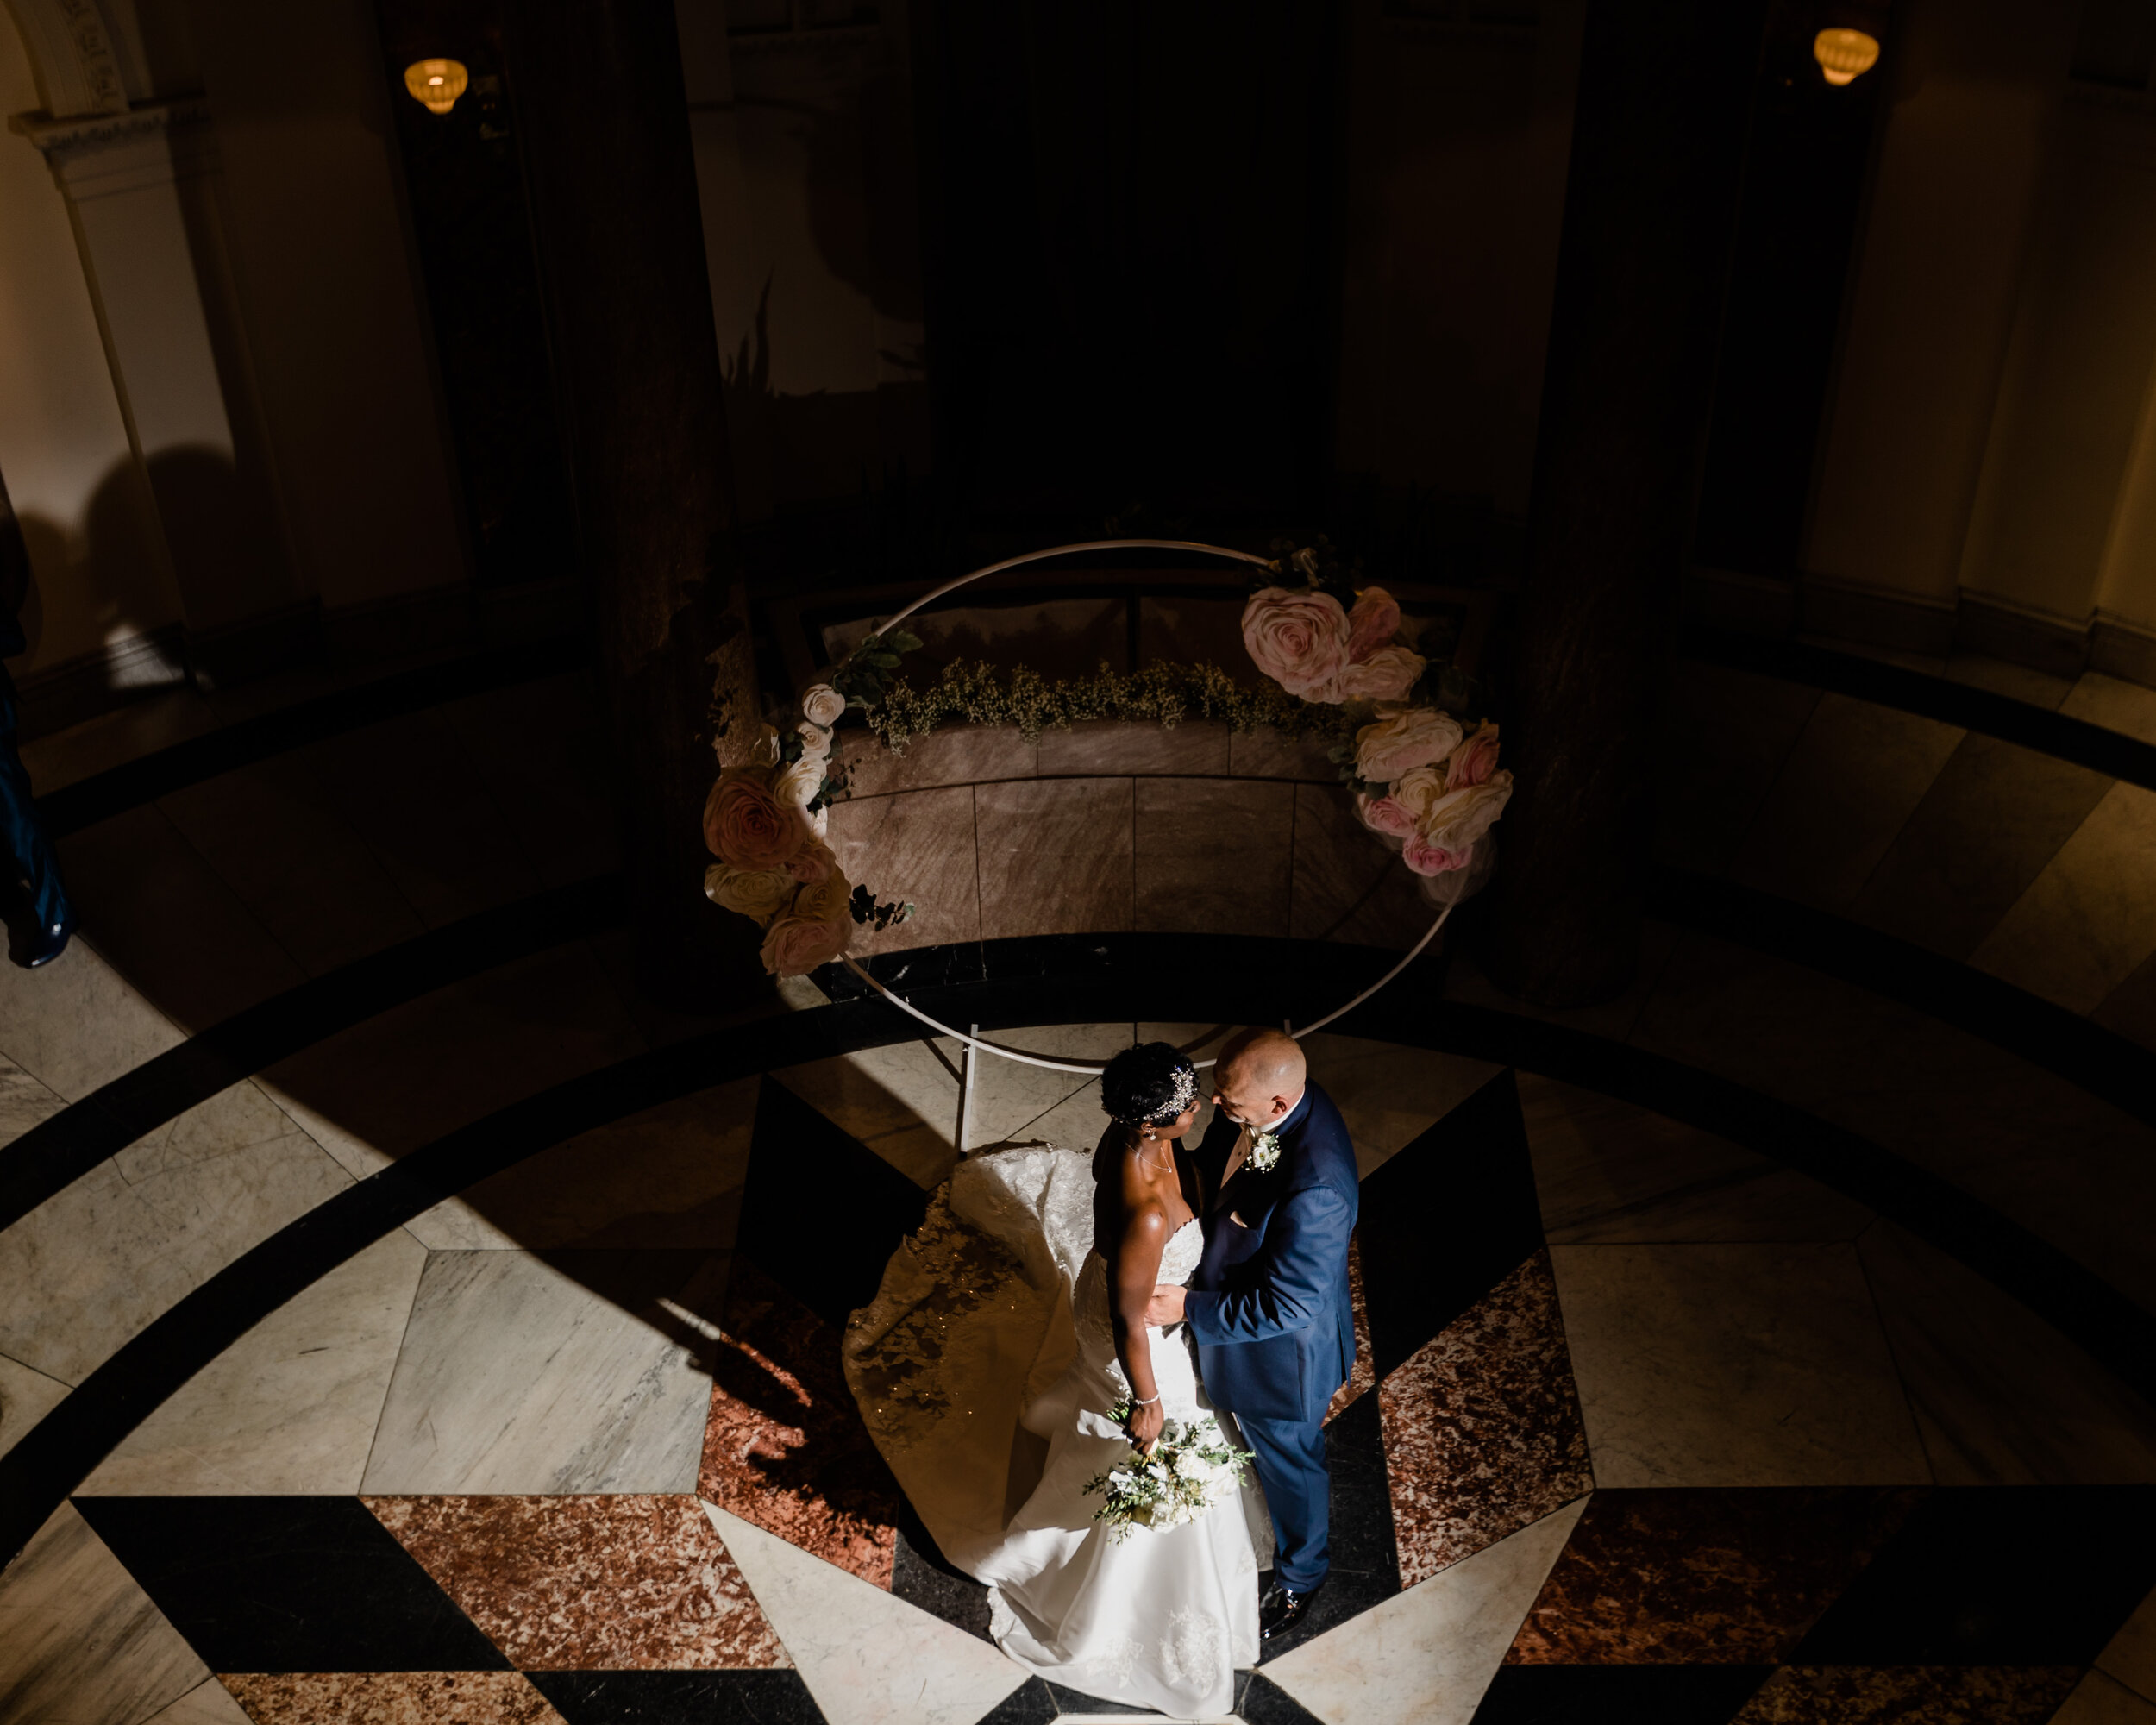 get married in baltimore city hall shot by megapixels media biracial couple wedding photographers maryland-82.jpg